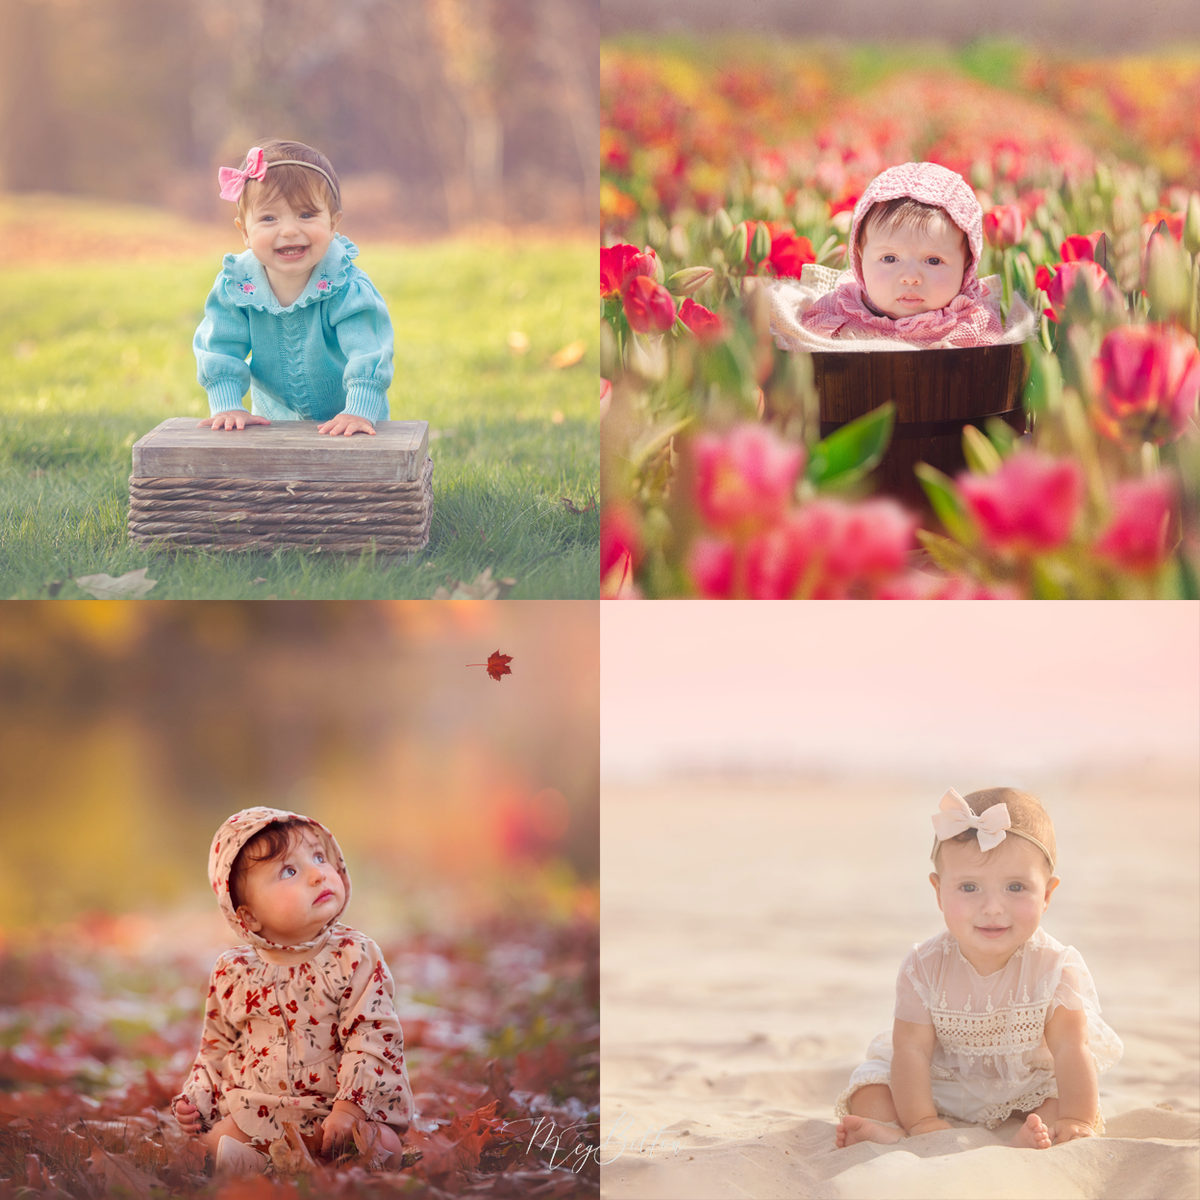 Behind the Camera: Baby's First Year - Meg Bitton Productions